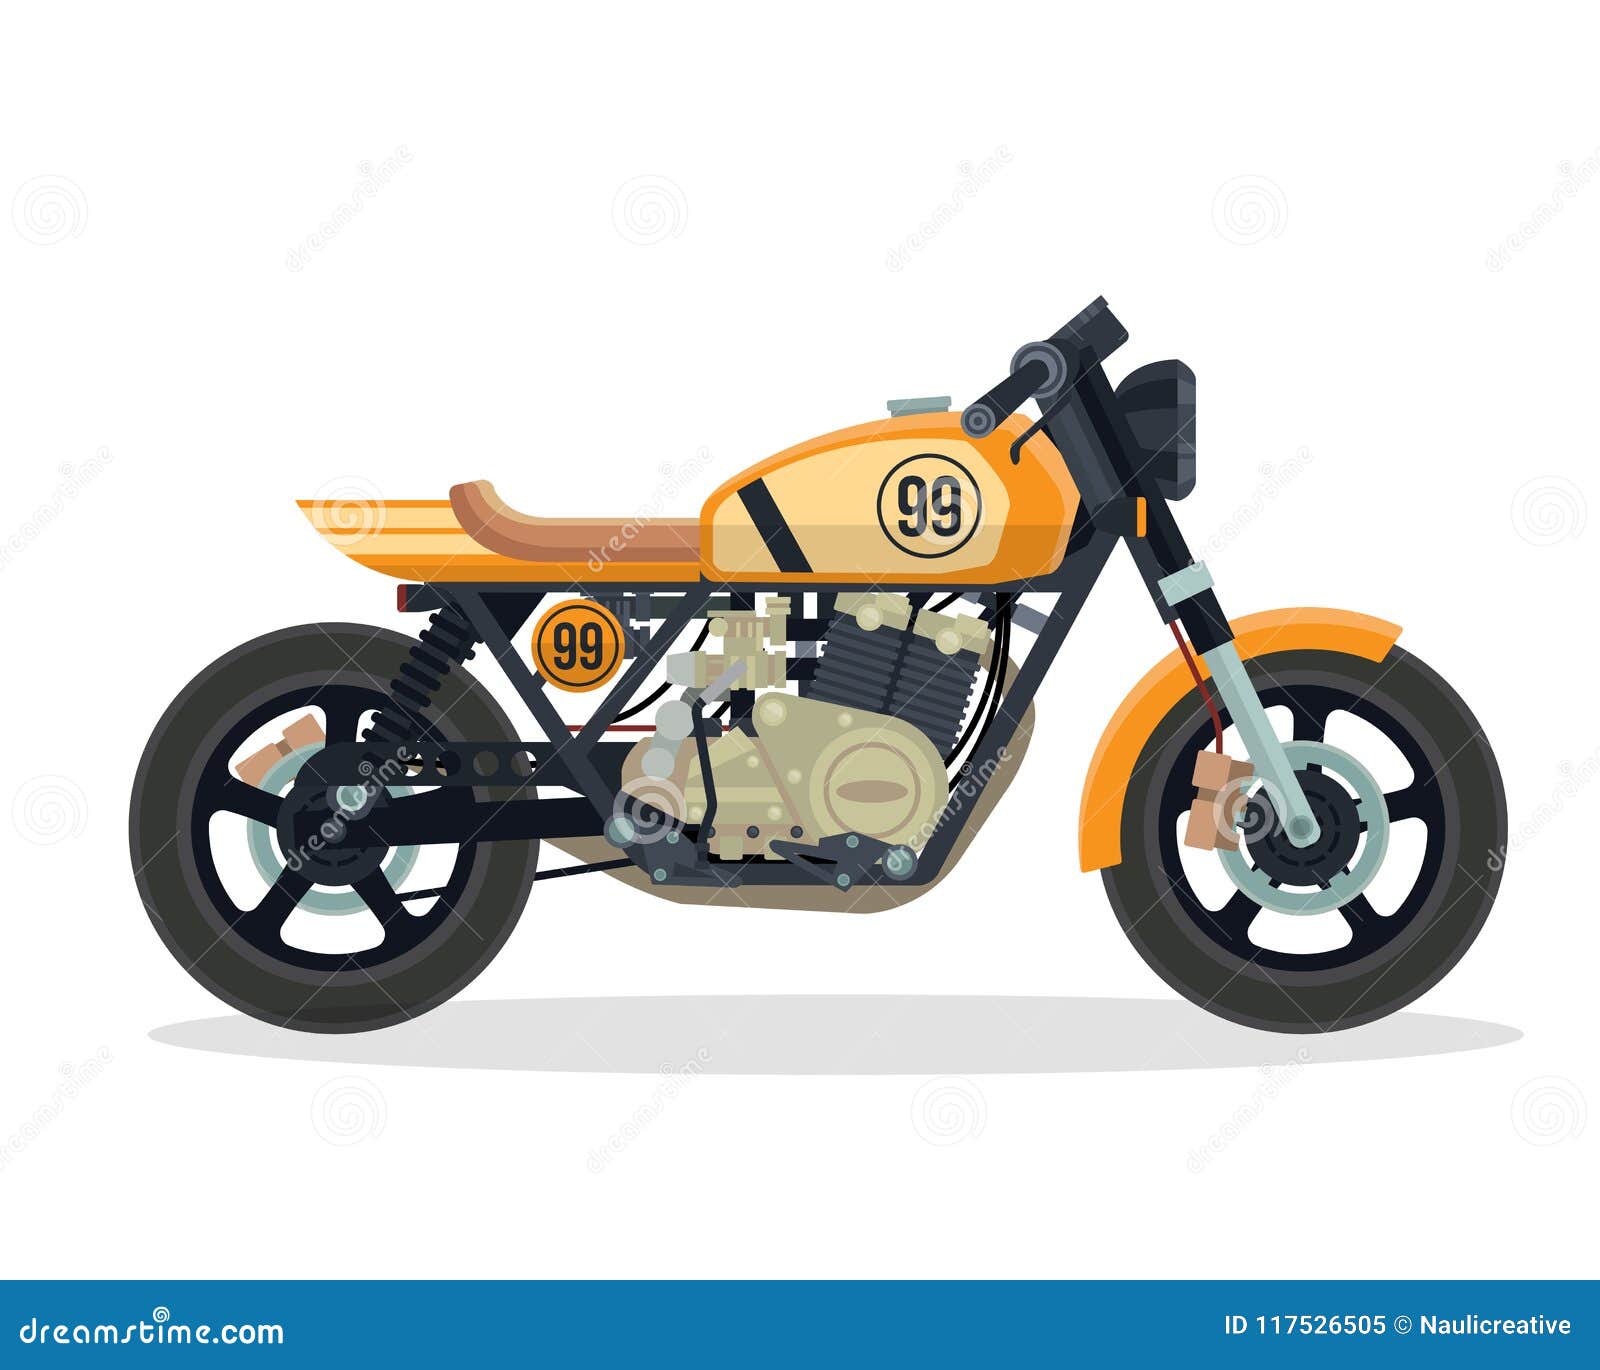 vintage classic cafe racer motorcycle 